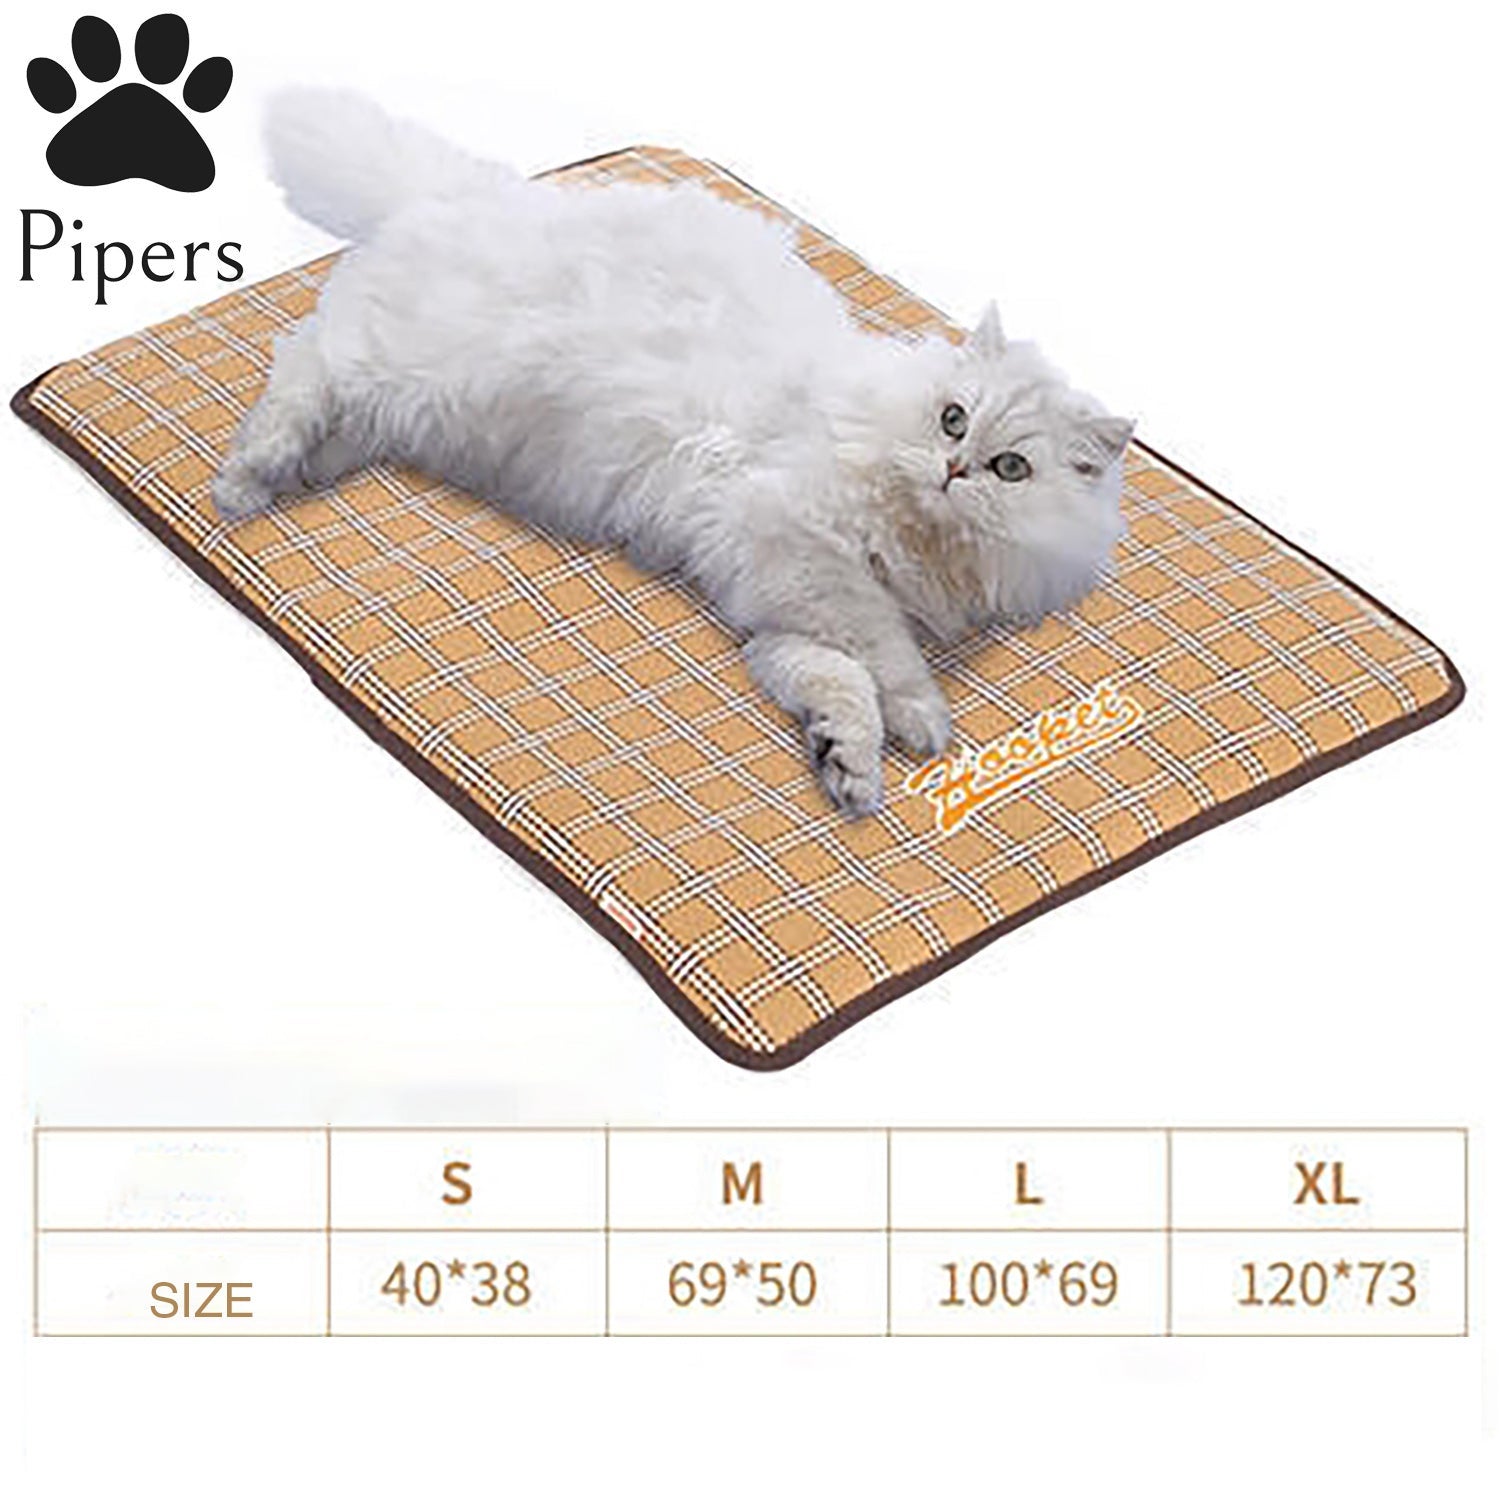 Pipers Pet Cooling Mats Dog Cat Pad Gel Puppy Ice Summer ...